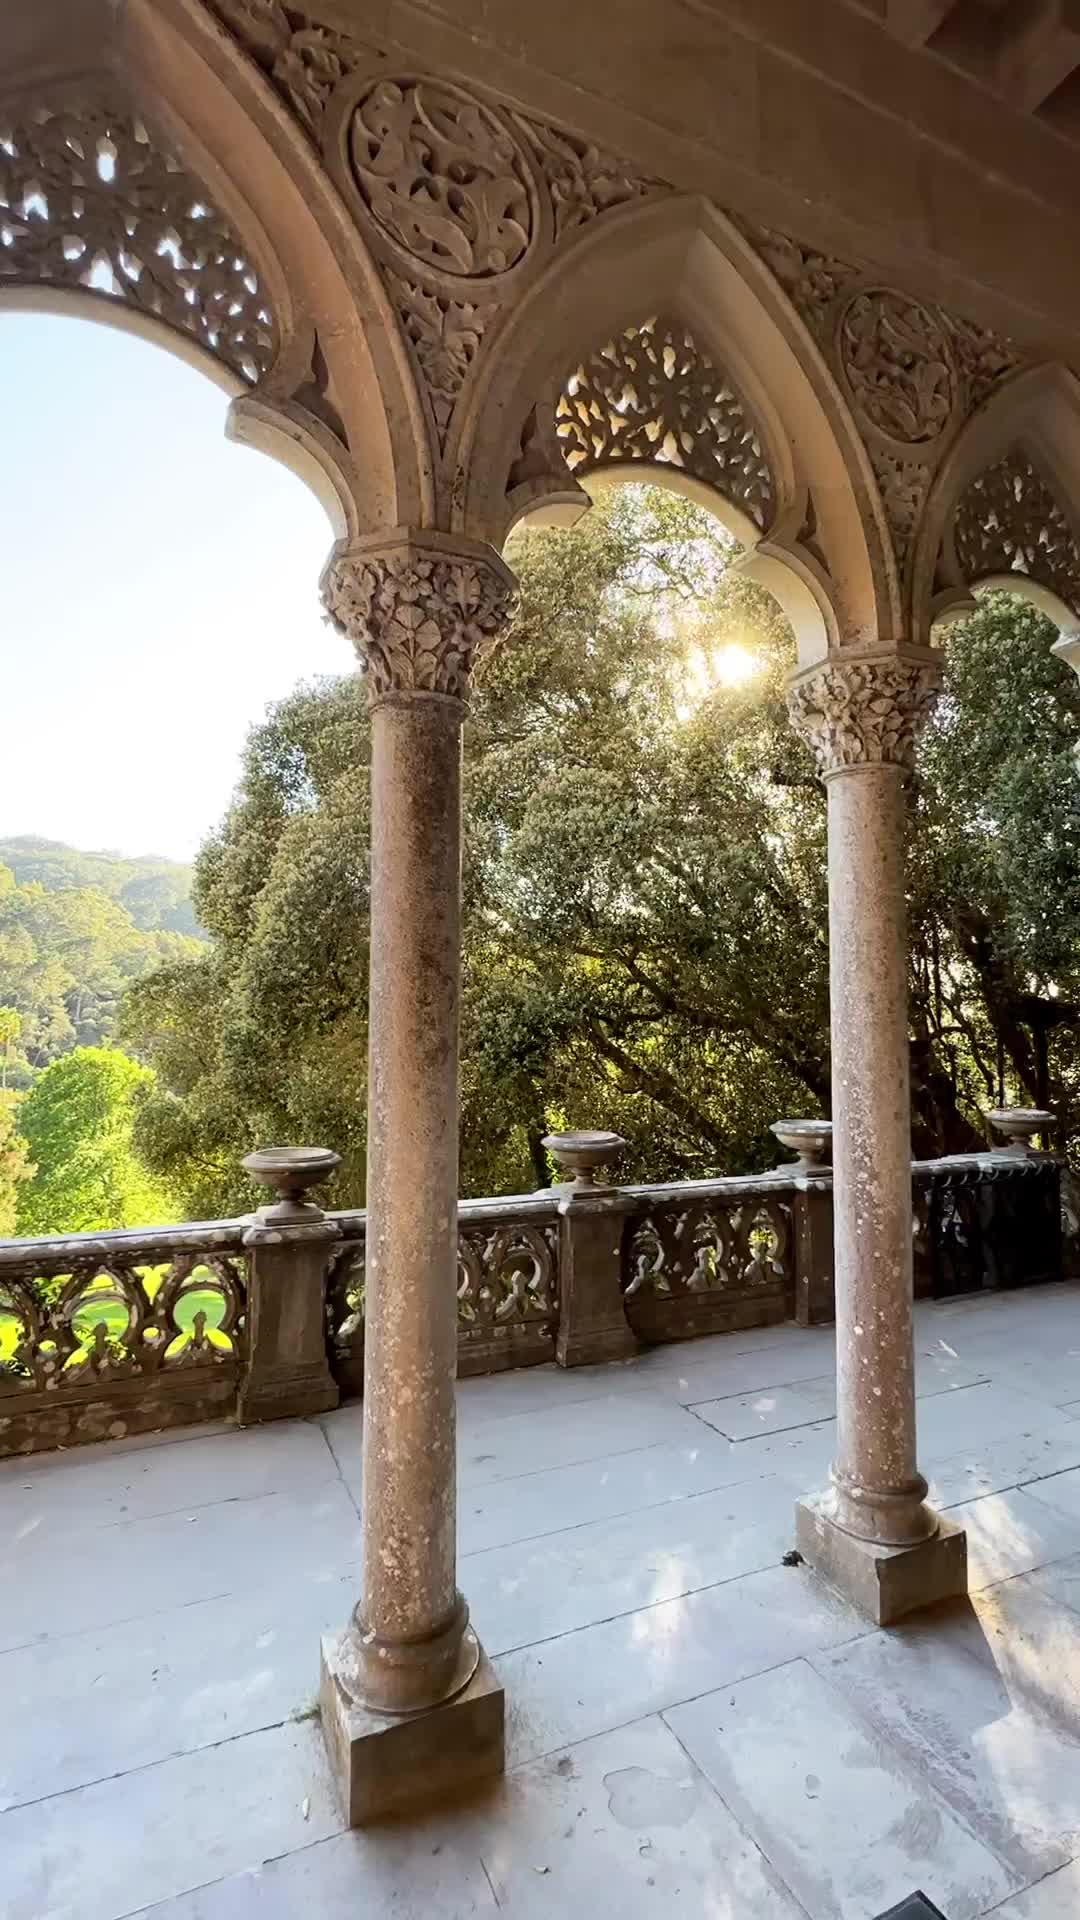 Discover Monserrate Park and Palace in Sintra, Portugal